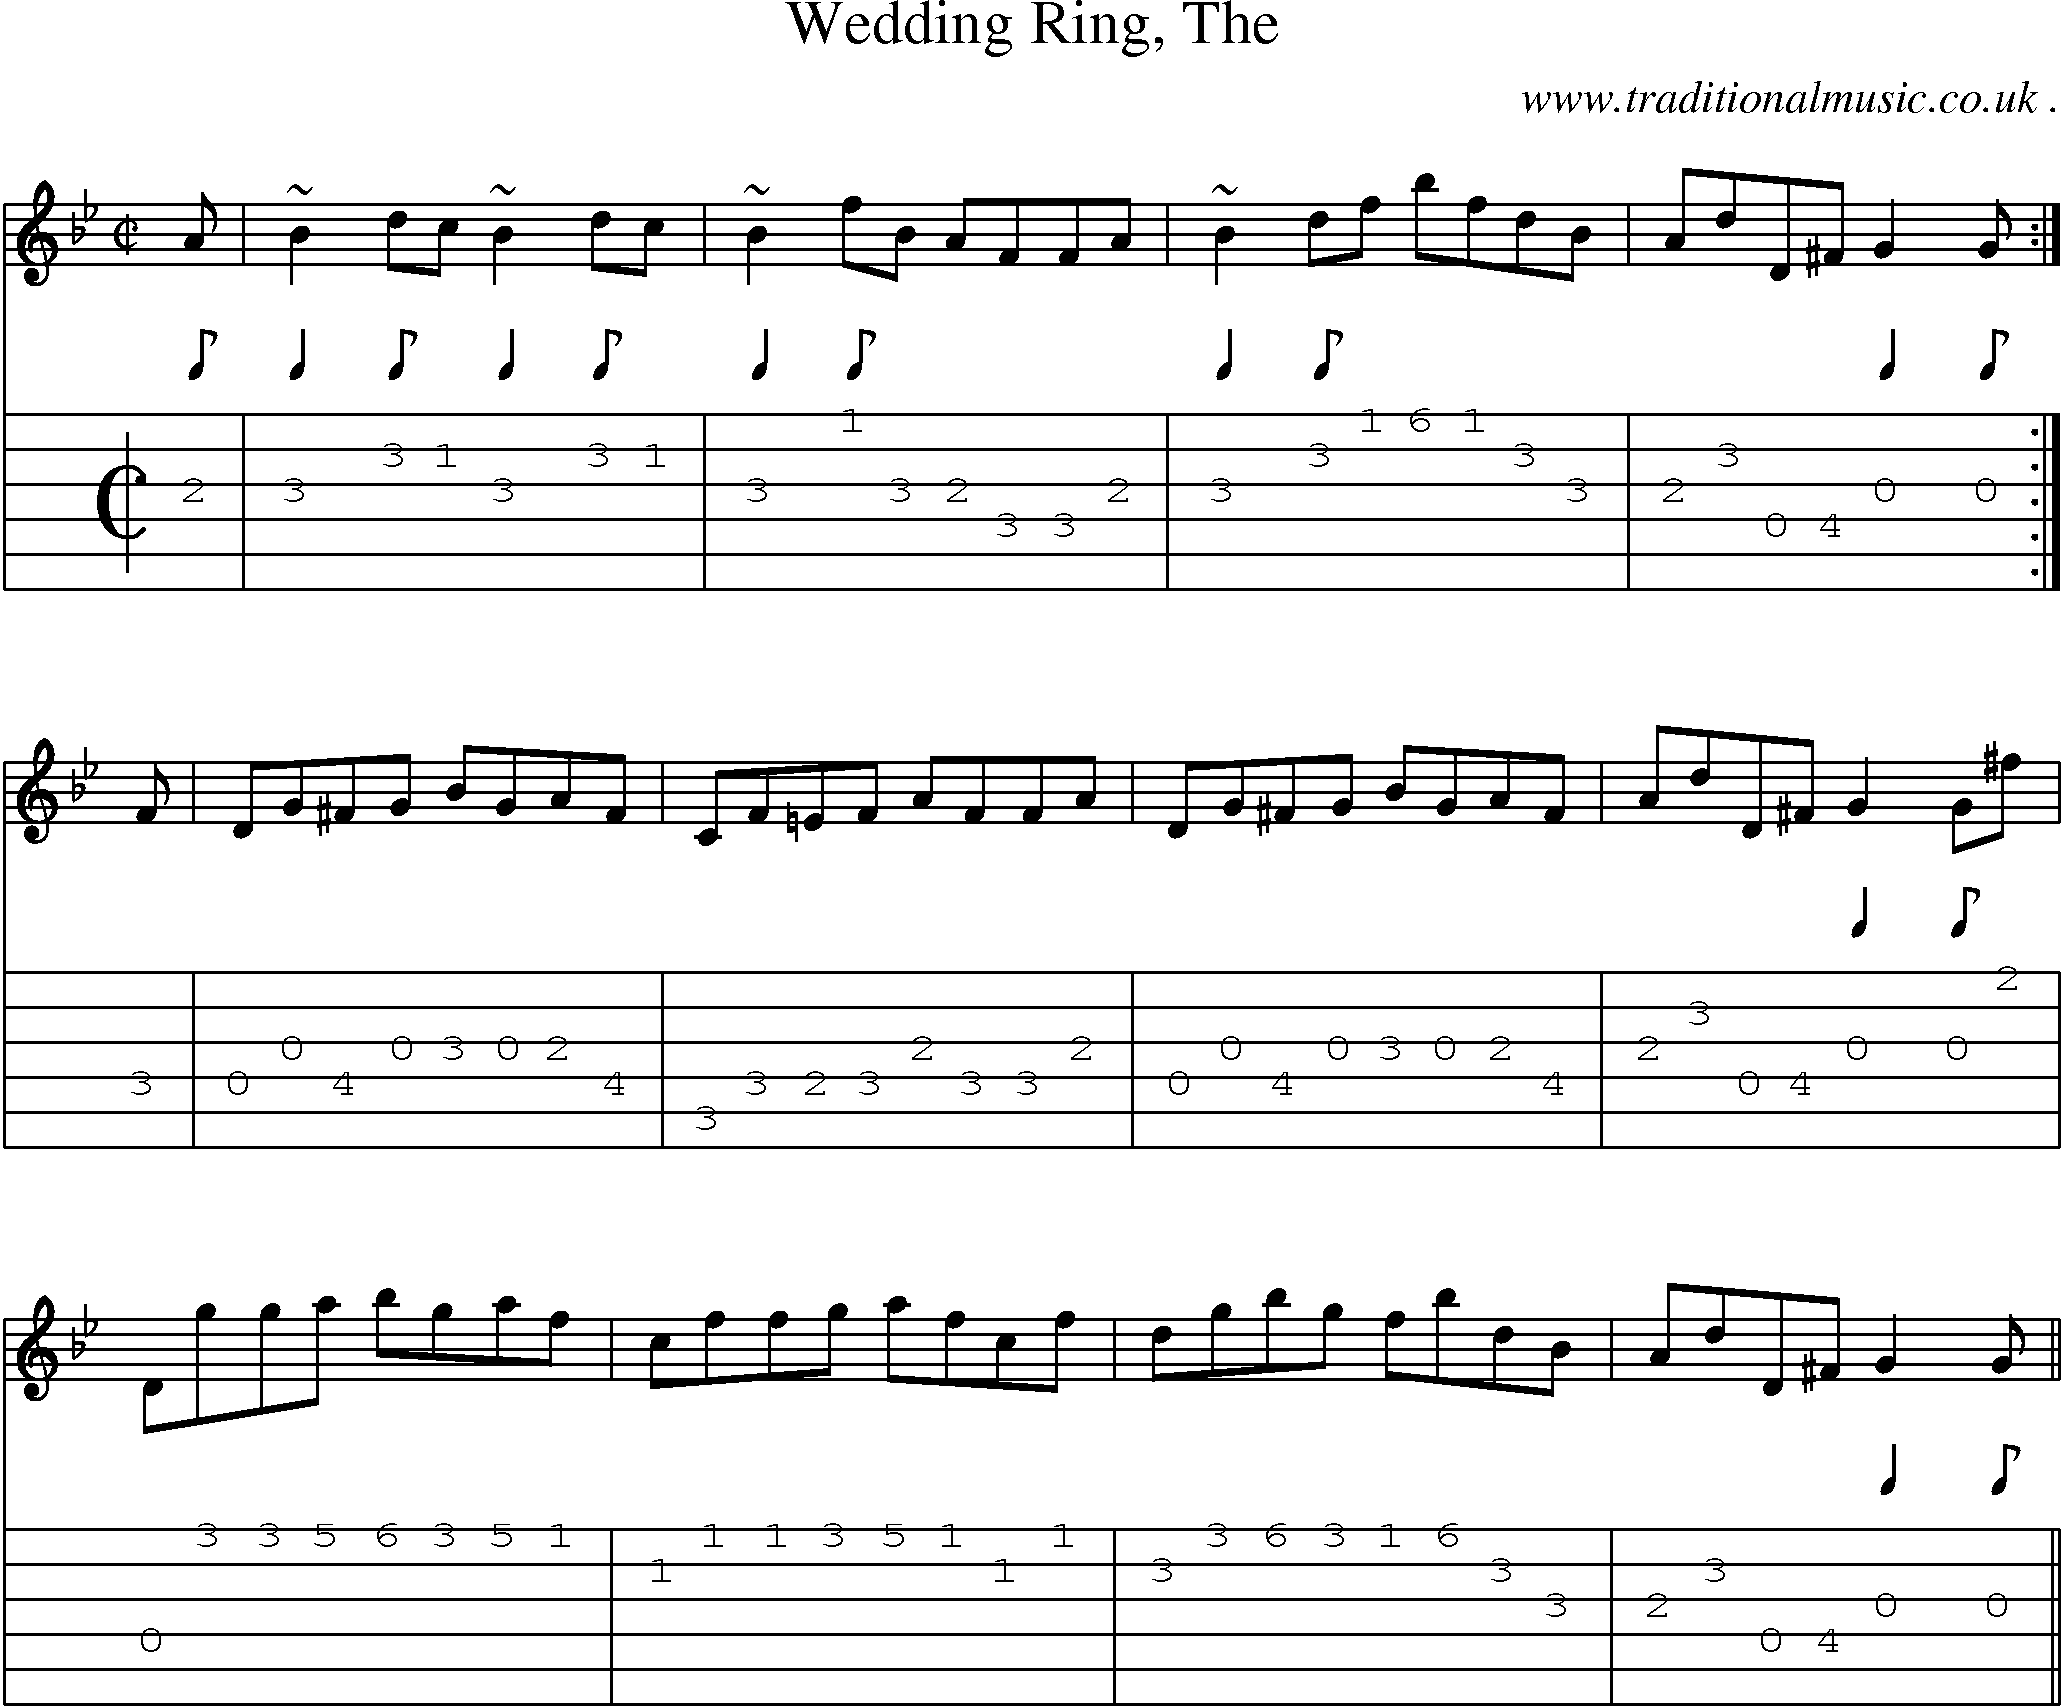 Sheet-music  score, Chords and Guitar Tabs for Wedding Ring The